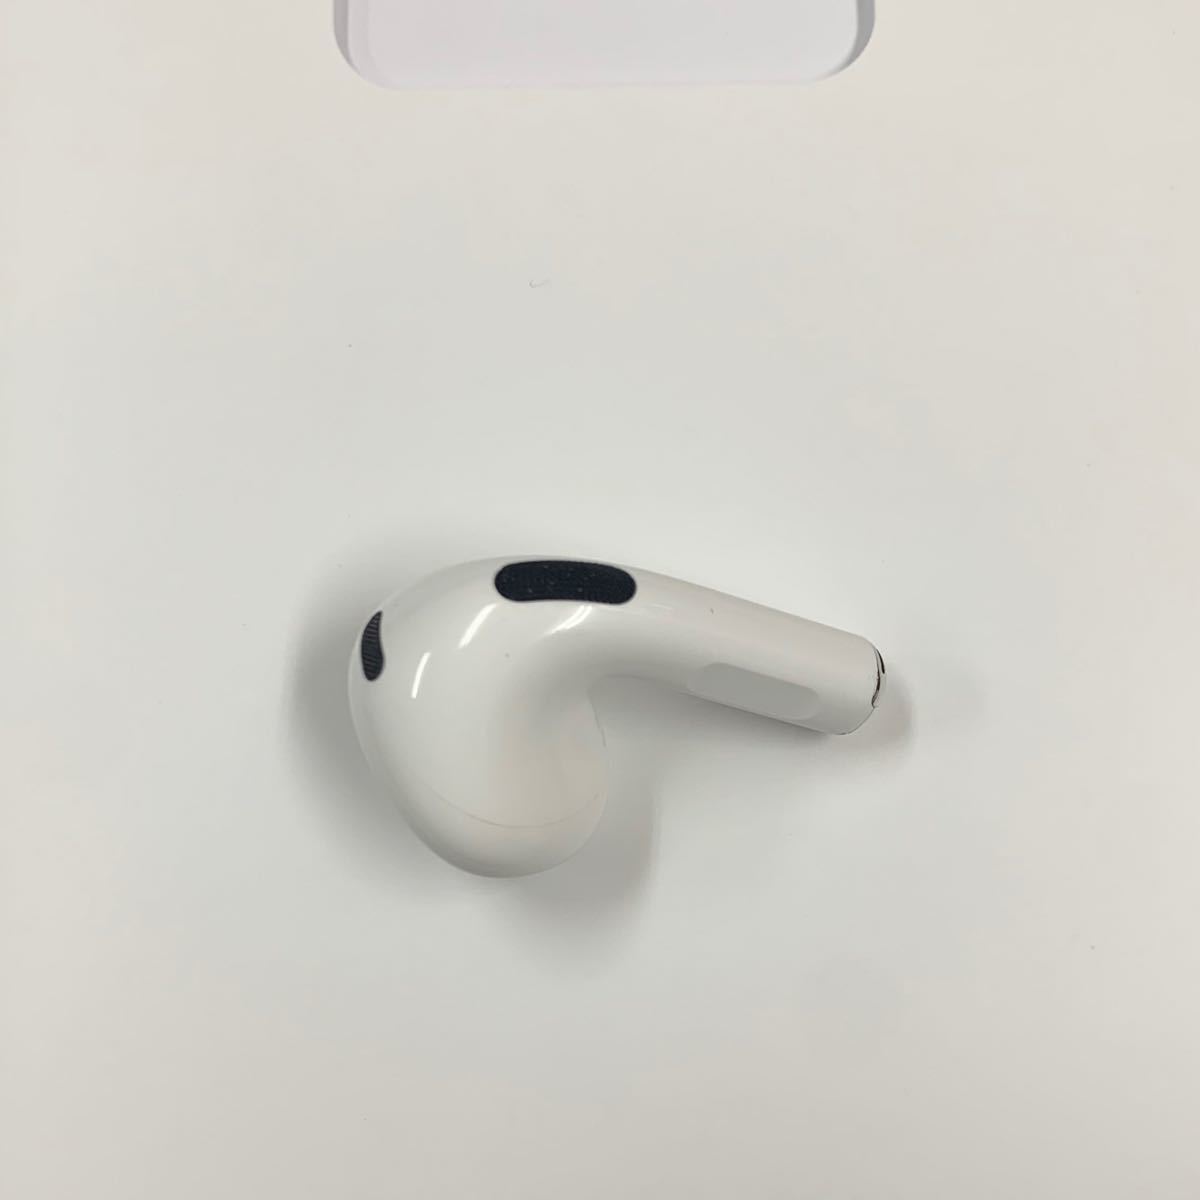 Apple国内正規品 エアポッズ AirPods 第３世代エアーポッズ 左耳のみ